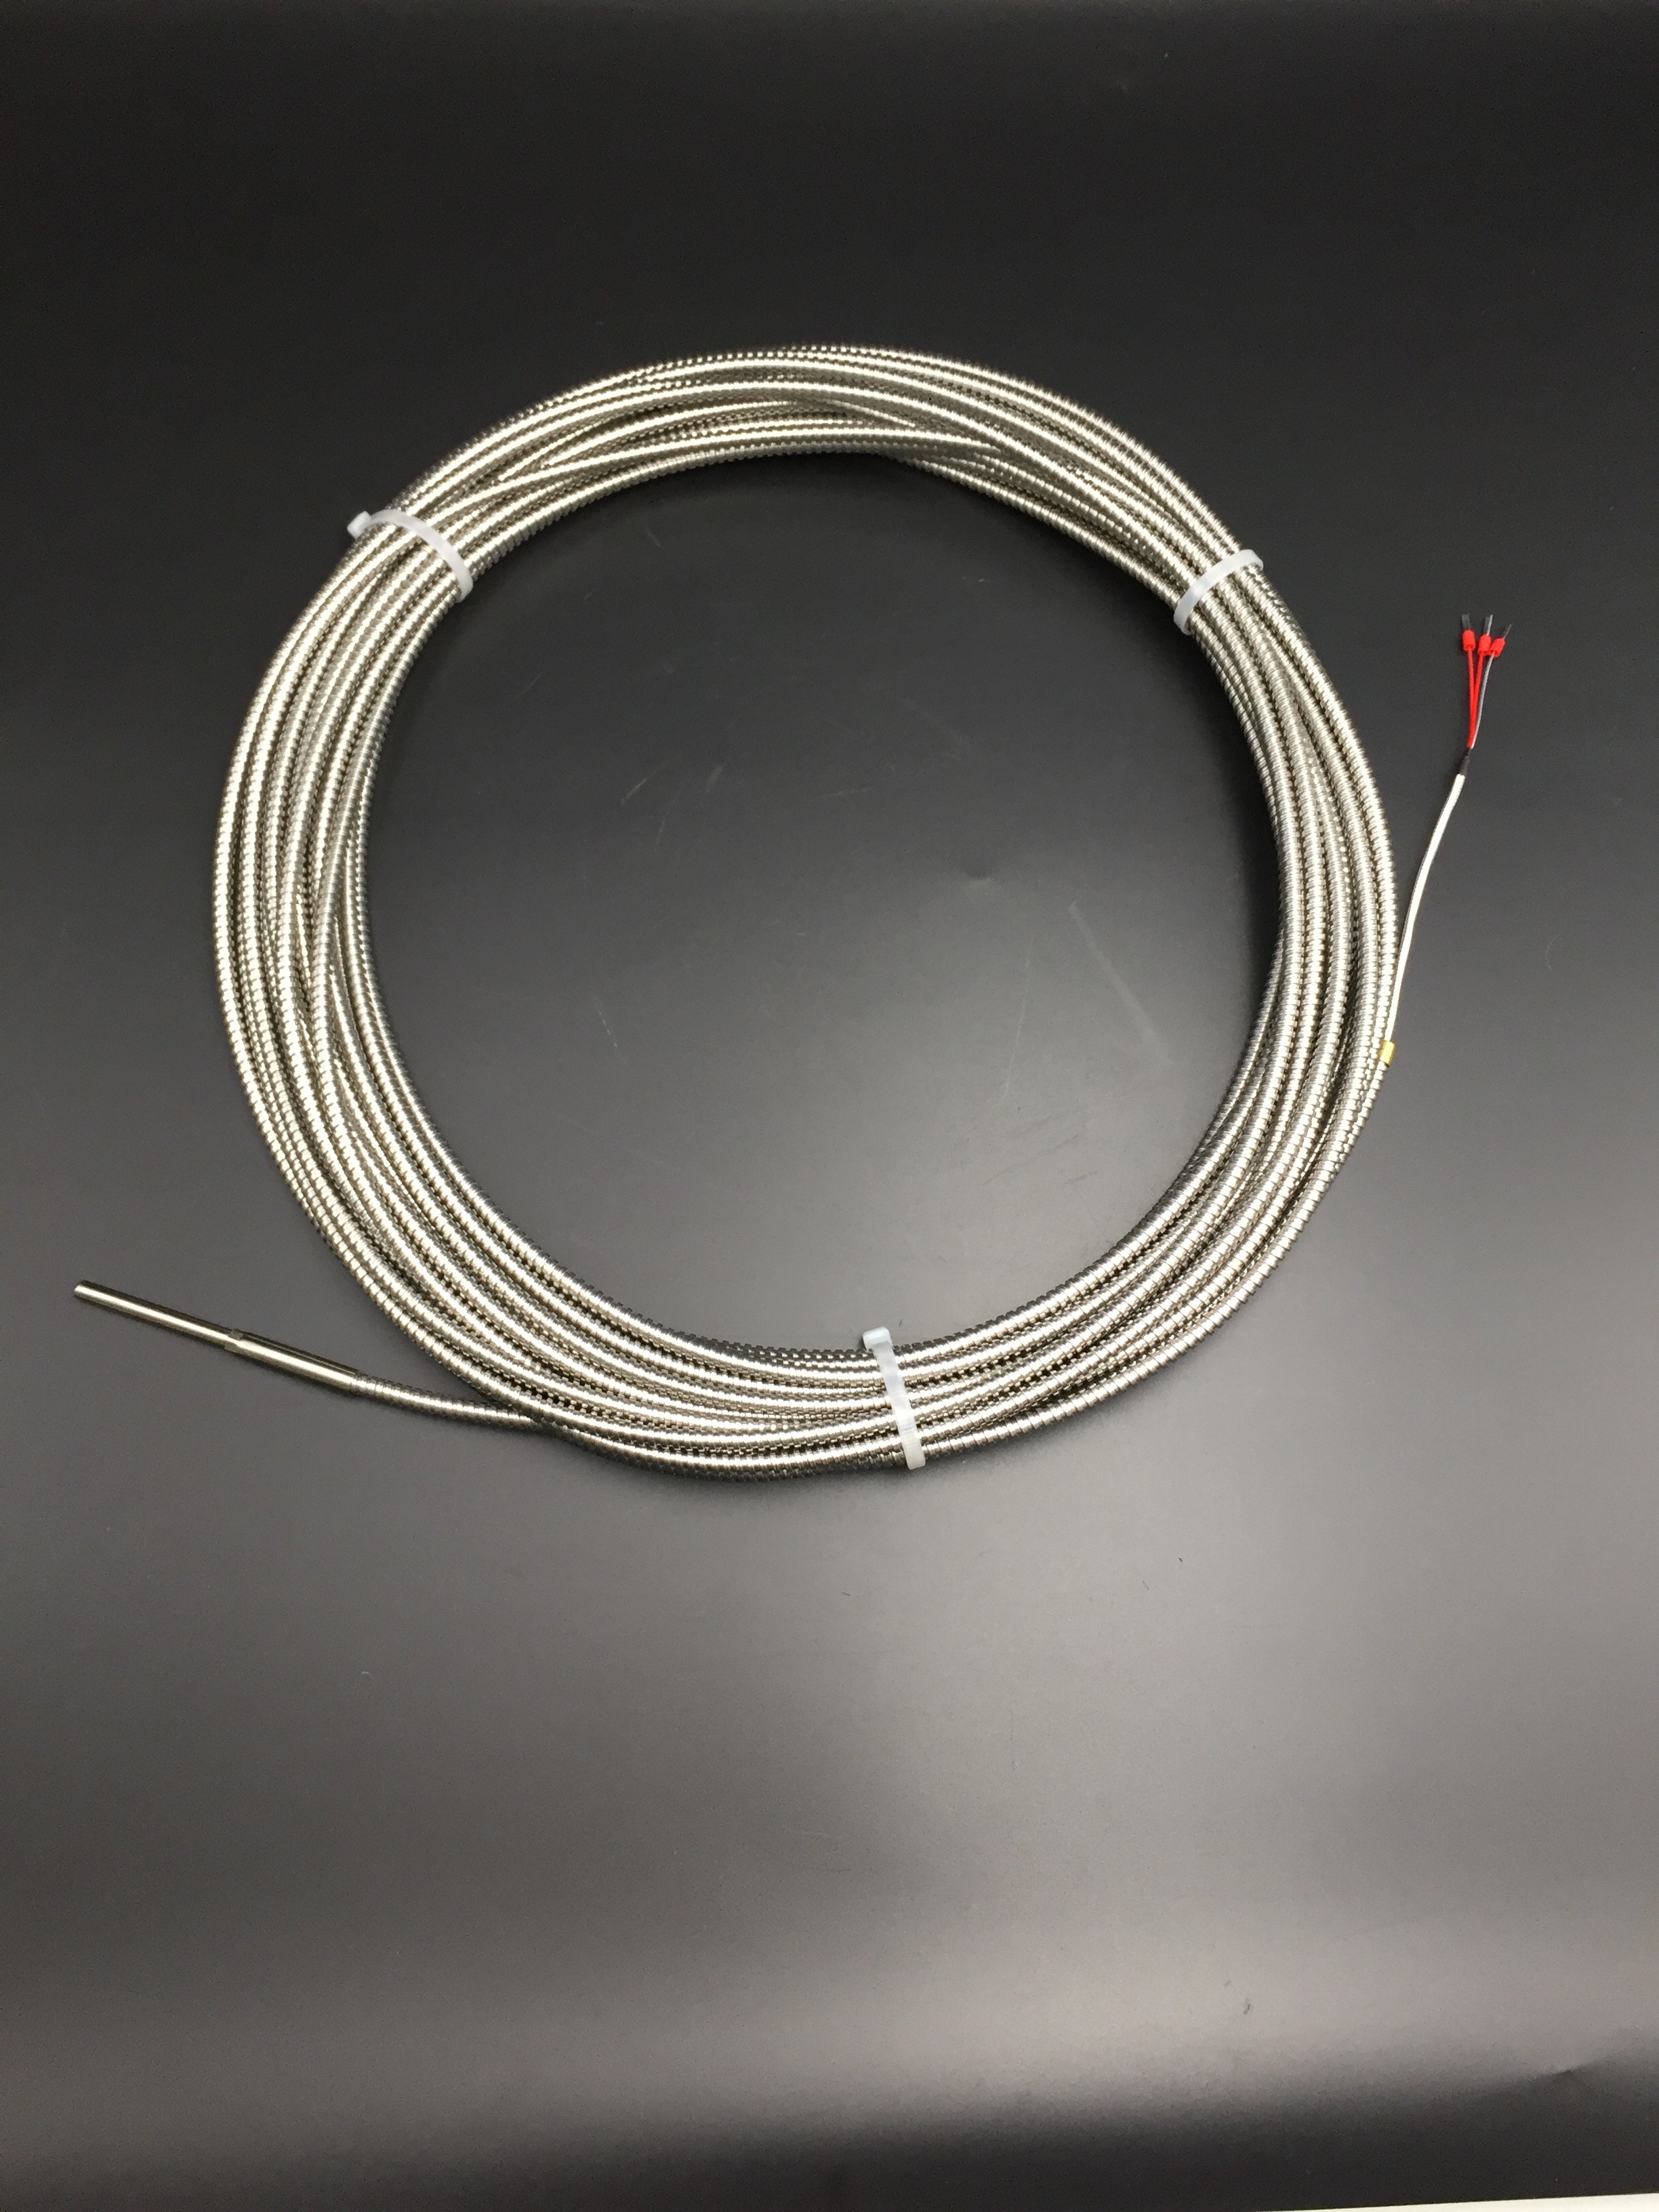 6mm Diameter Thermocouple RTD Pt100 Stainless Steel With 20M Metal Horse Tube